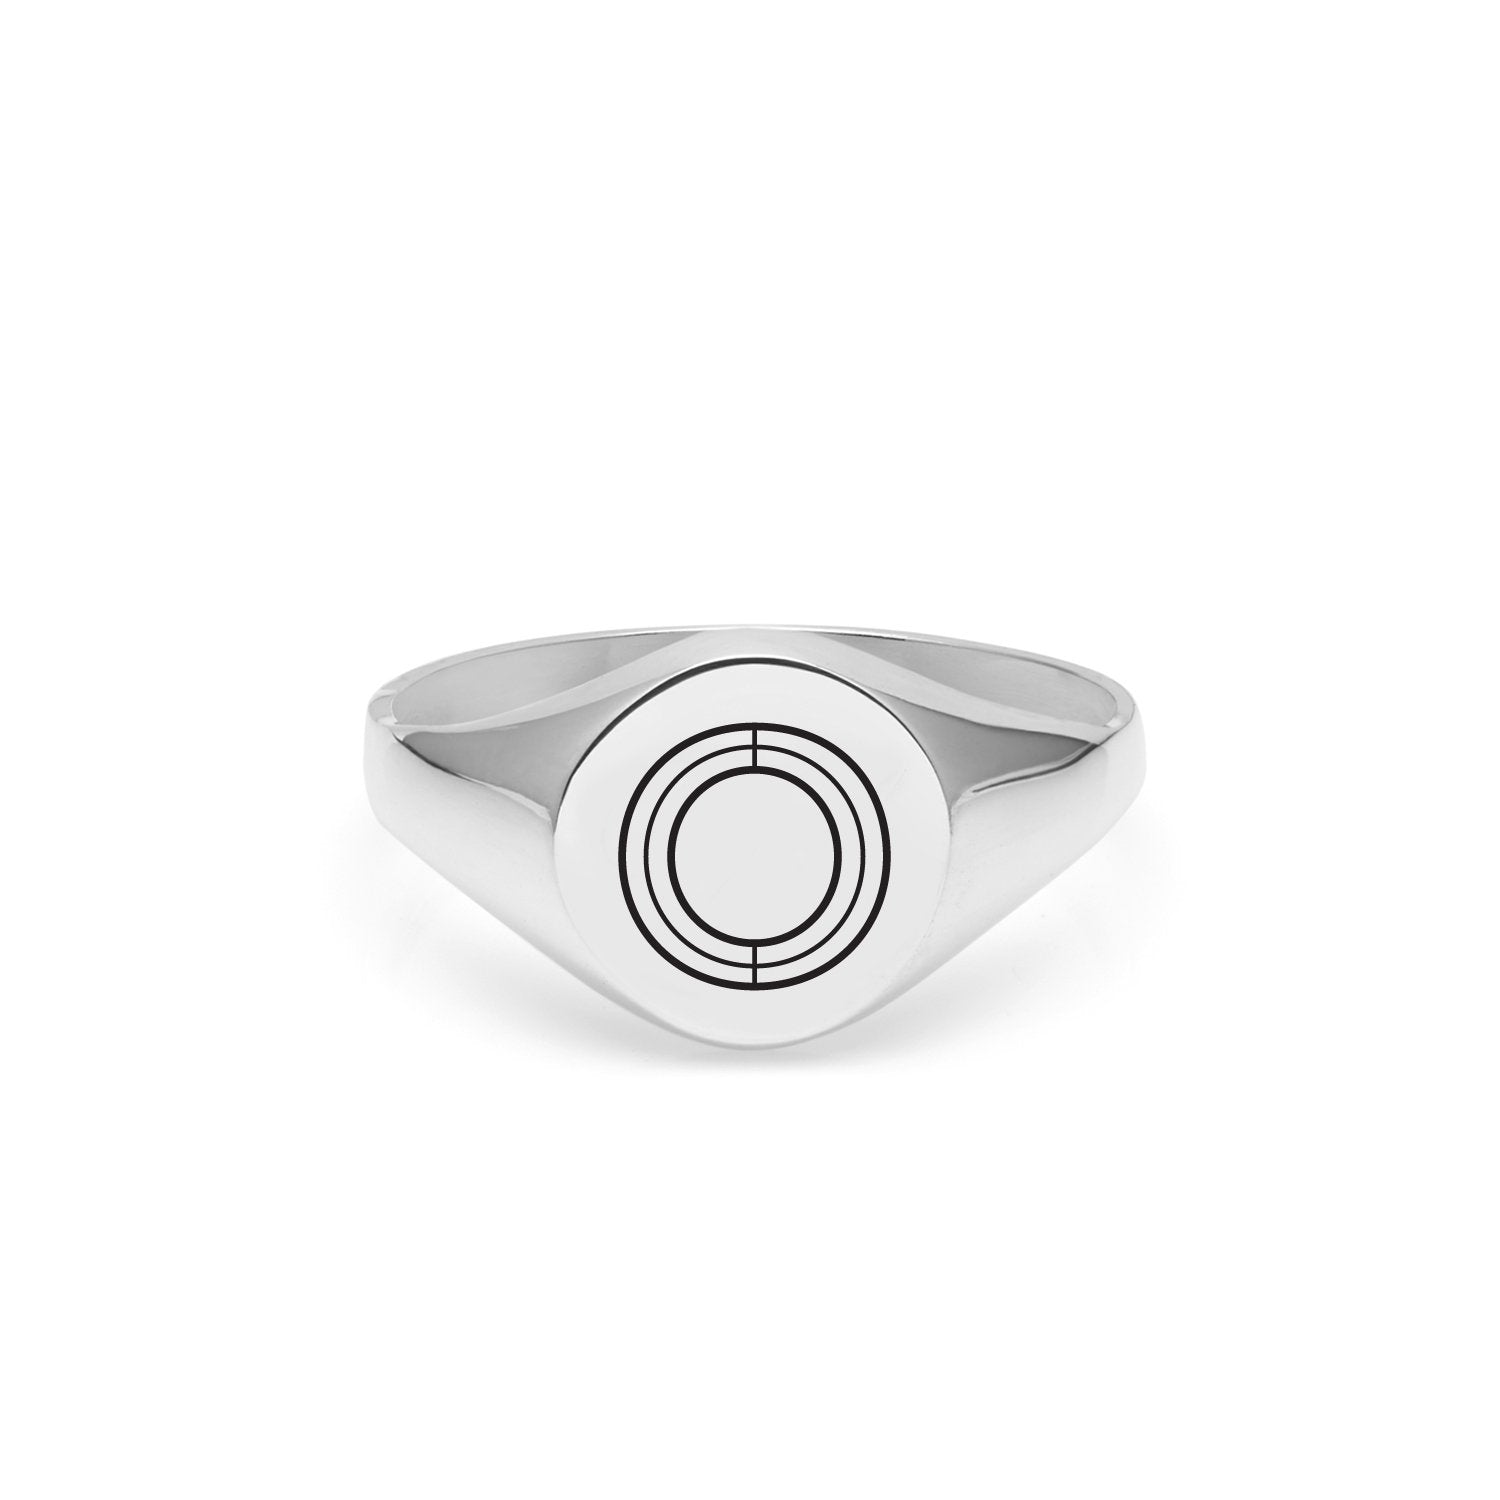 Facett Initial O Round Signet Ring - Silver - Myia Bonner Jewellery